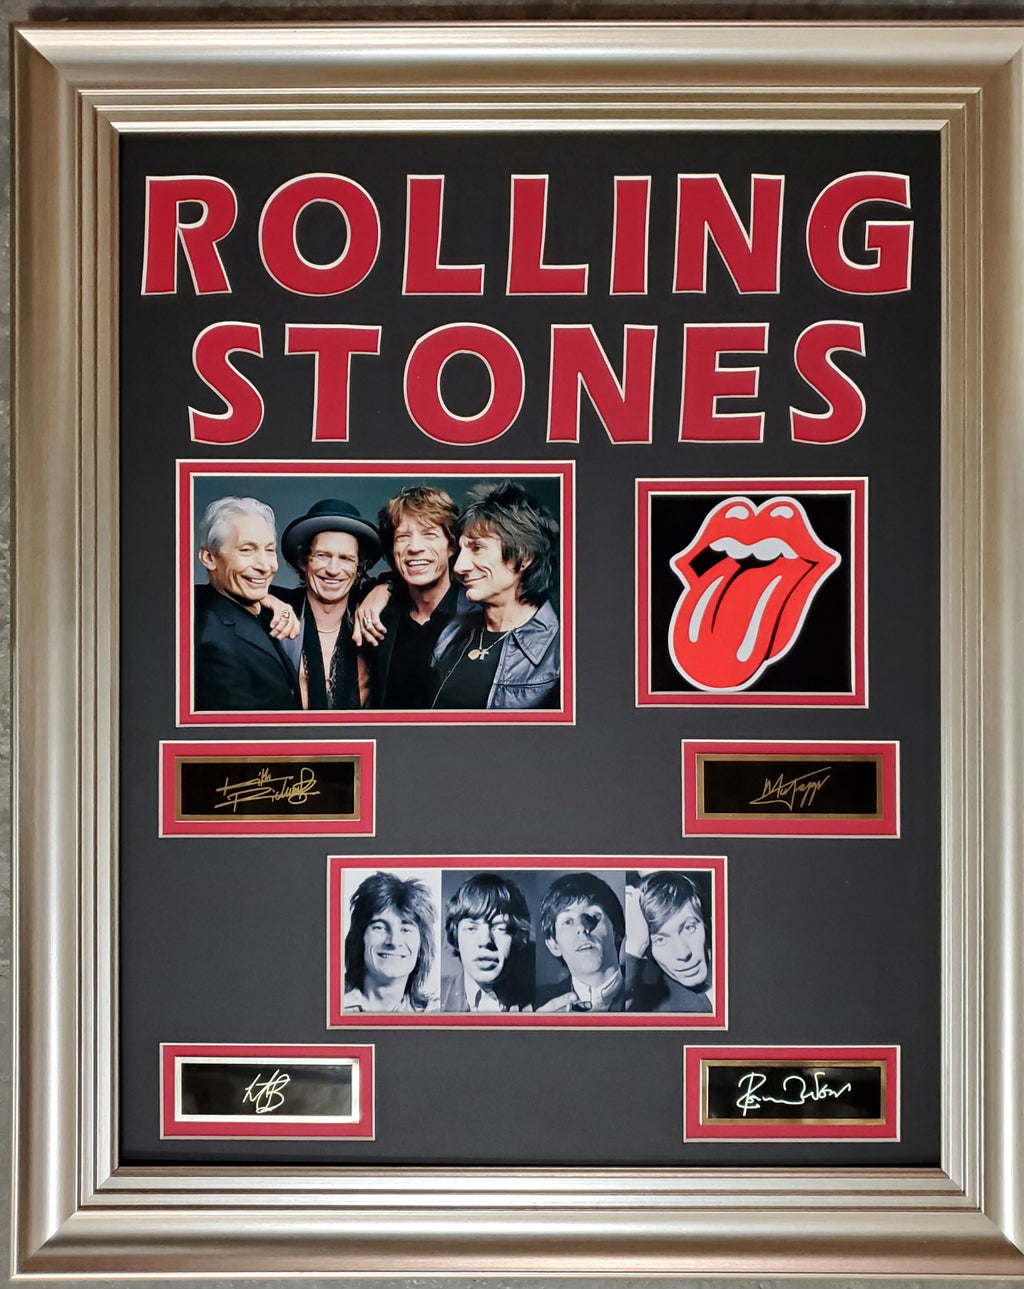 Rolling Stones - Band Tribute